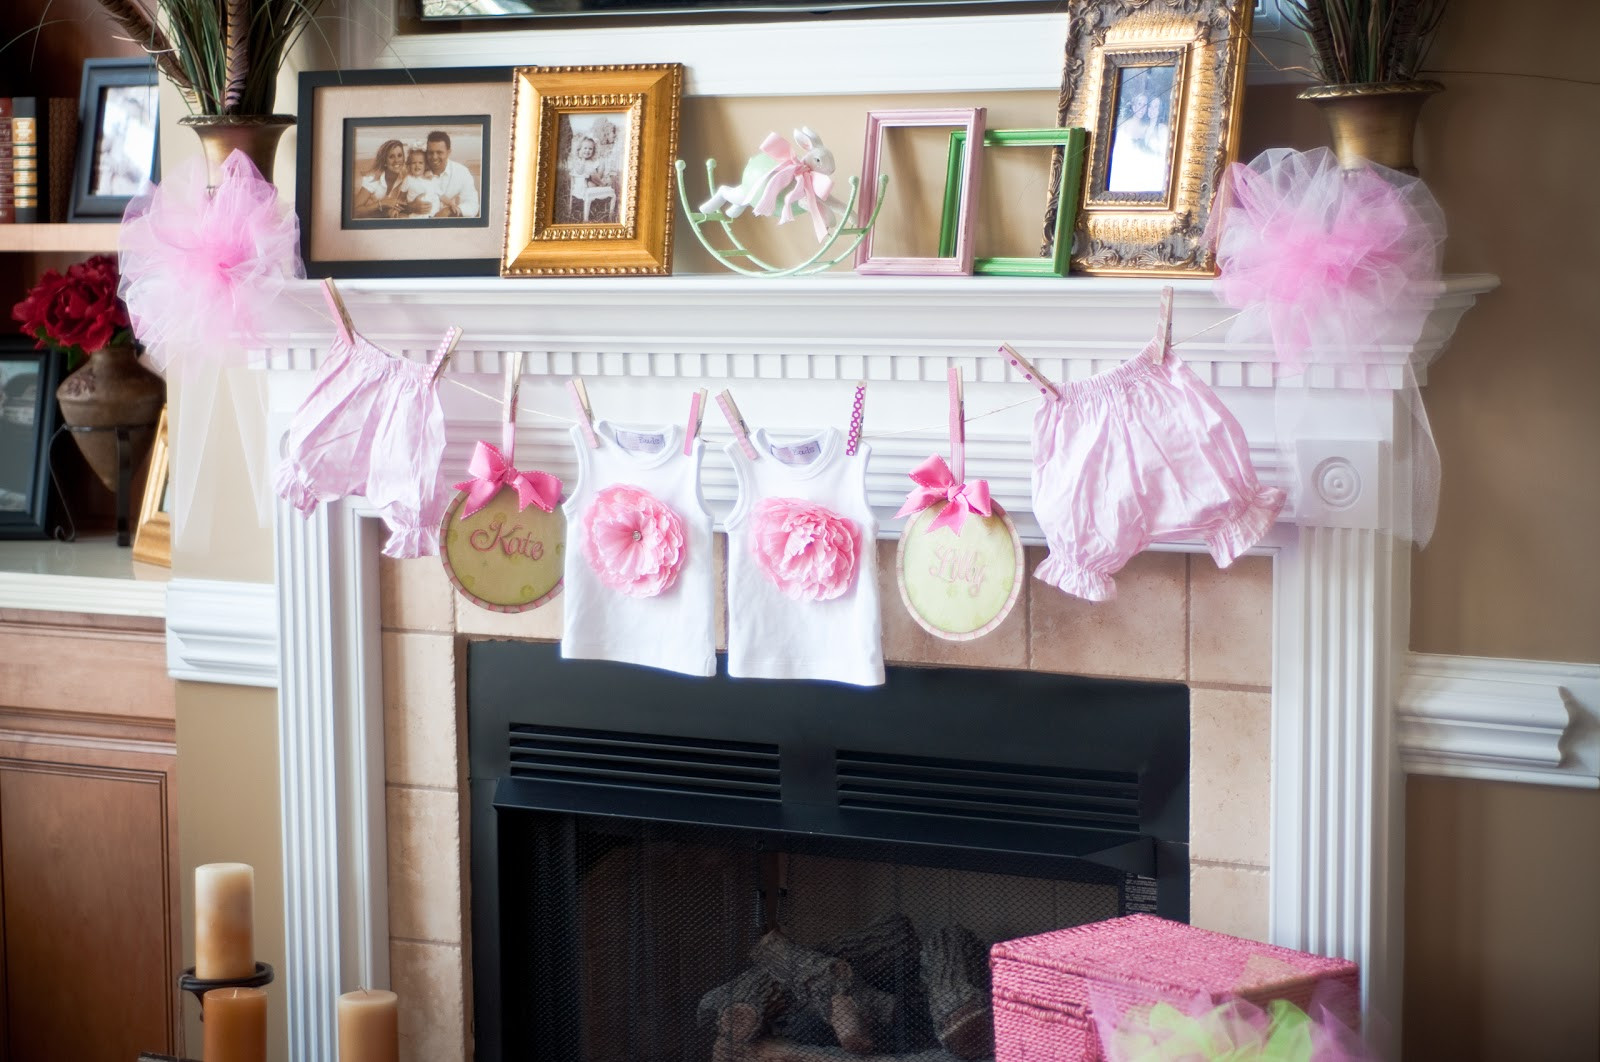 Ideas For Baby Shower Decorations
 paws & re thread baby shower decorating ideas clothes